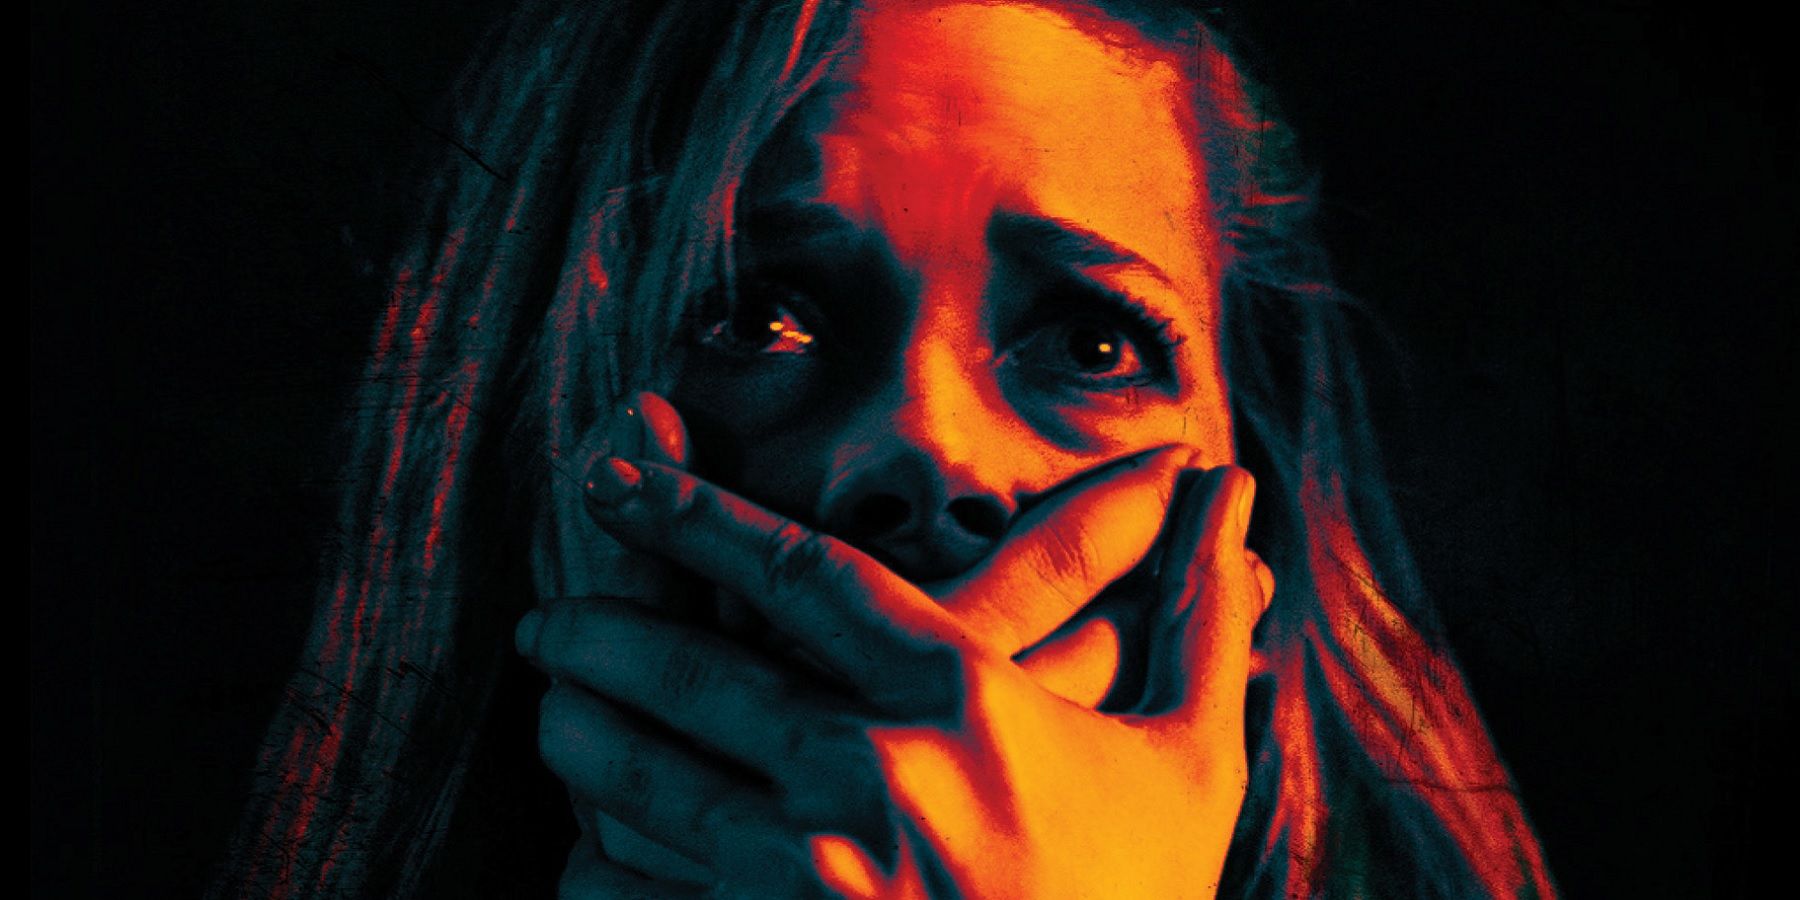 Don't Breathe poster excerpt